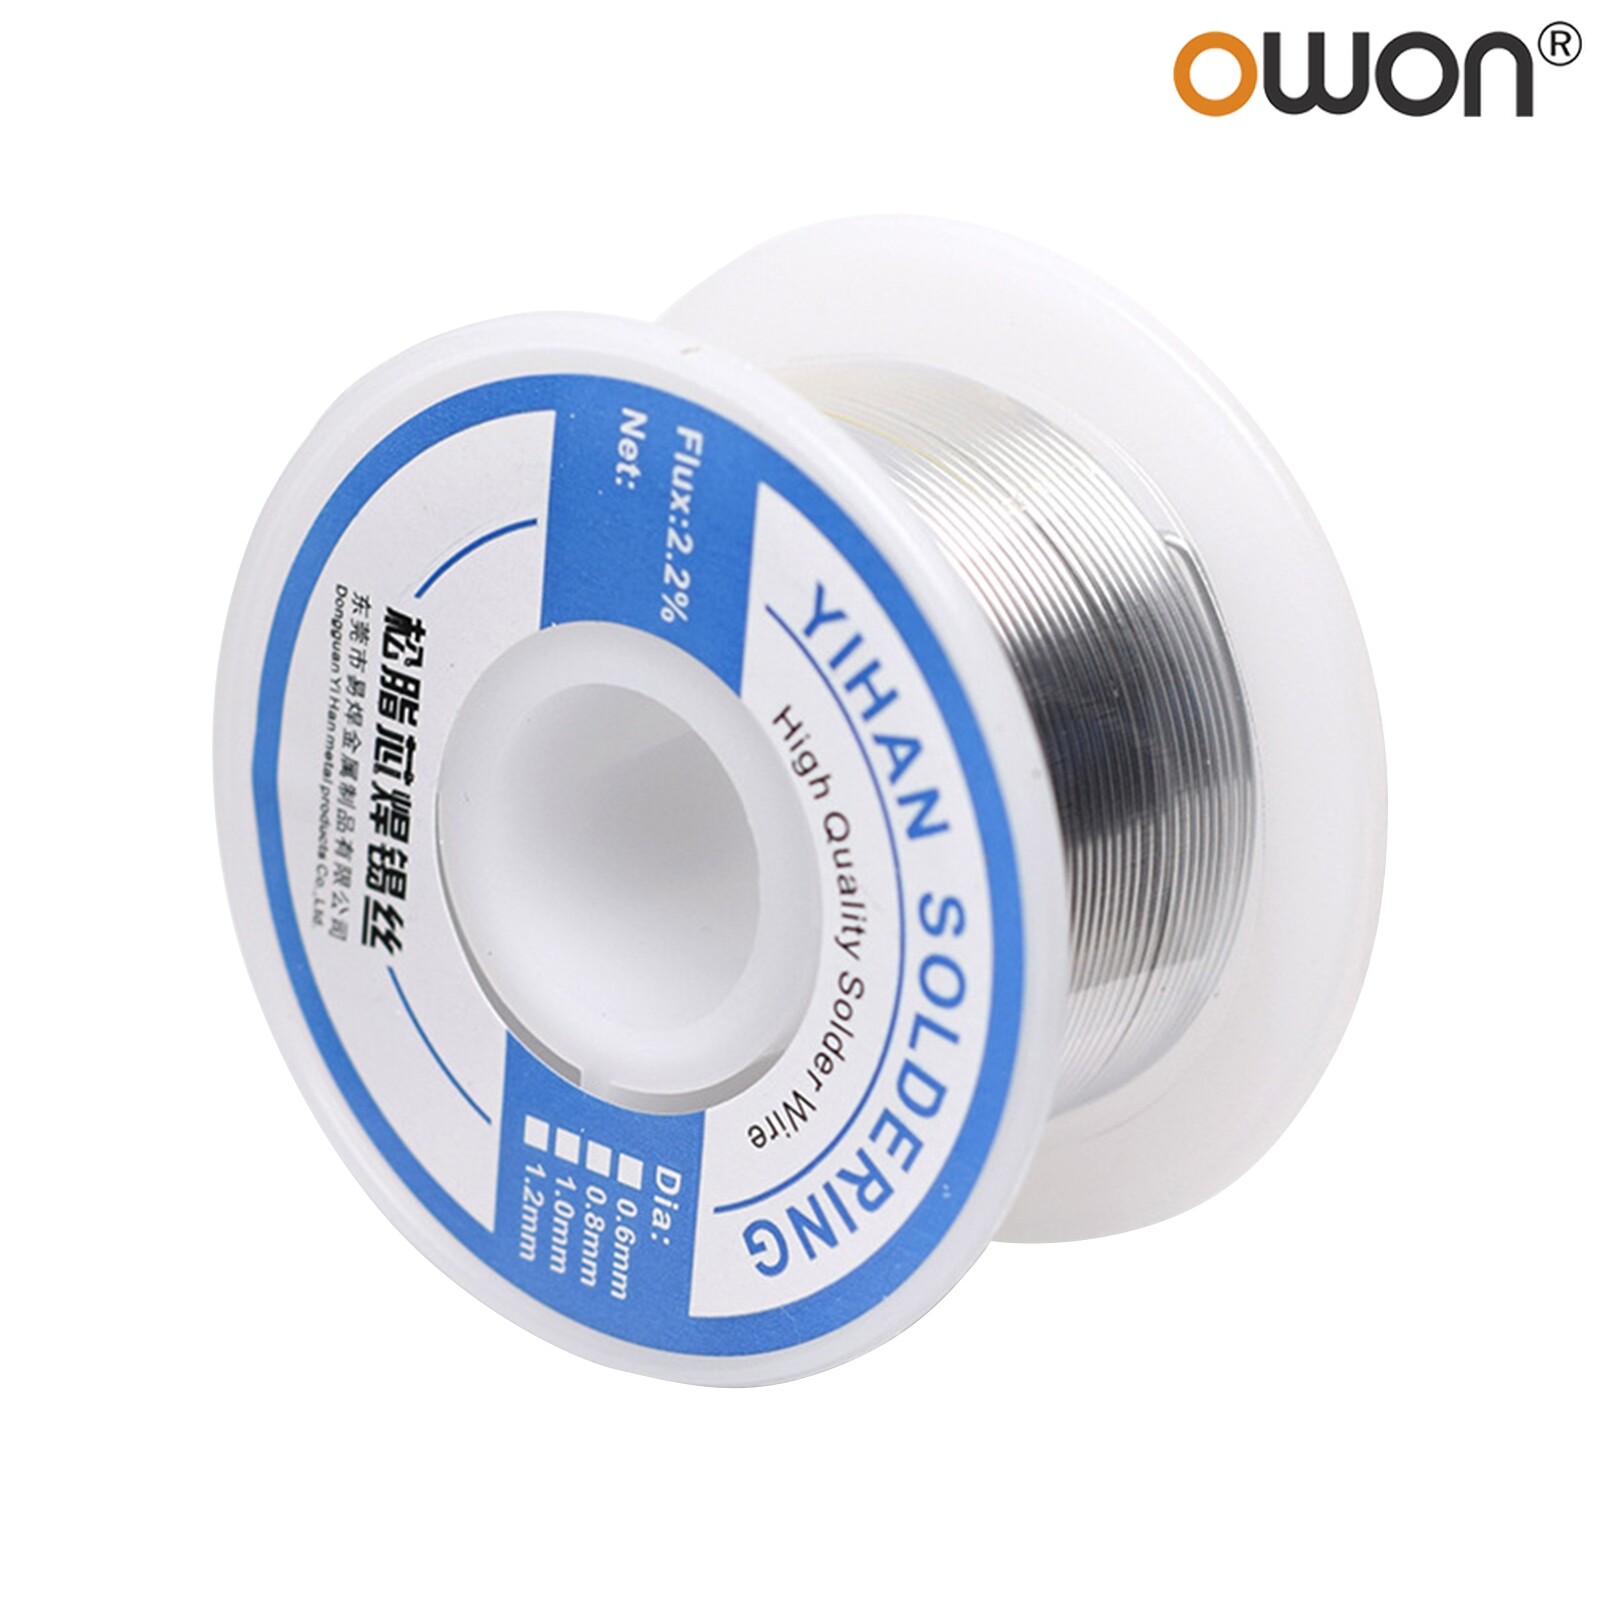 Solder Wire Low Melting Point Heat Resistant Practical Multifunctional